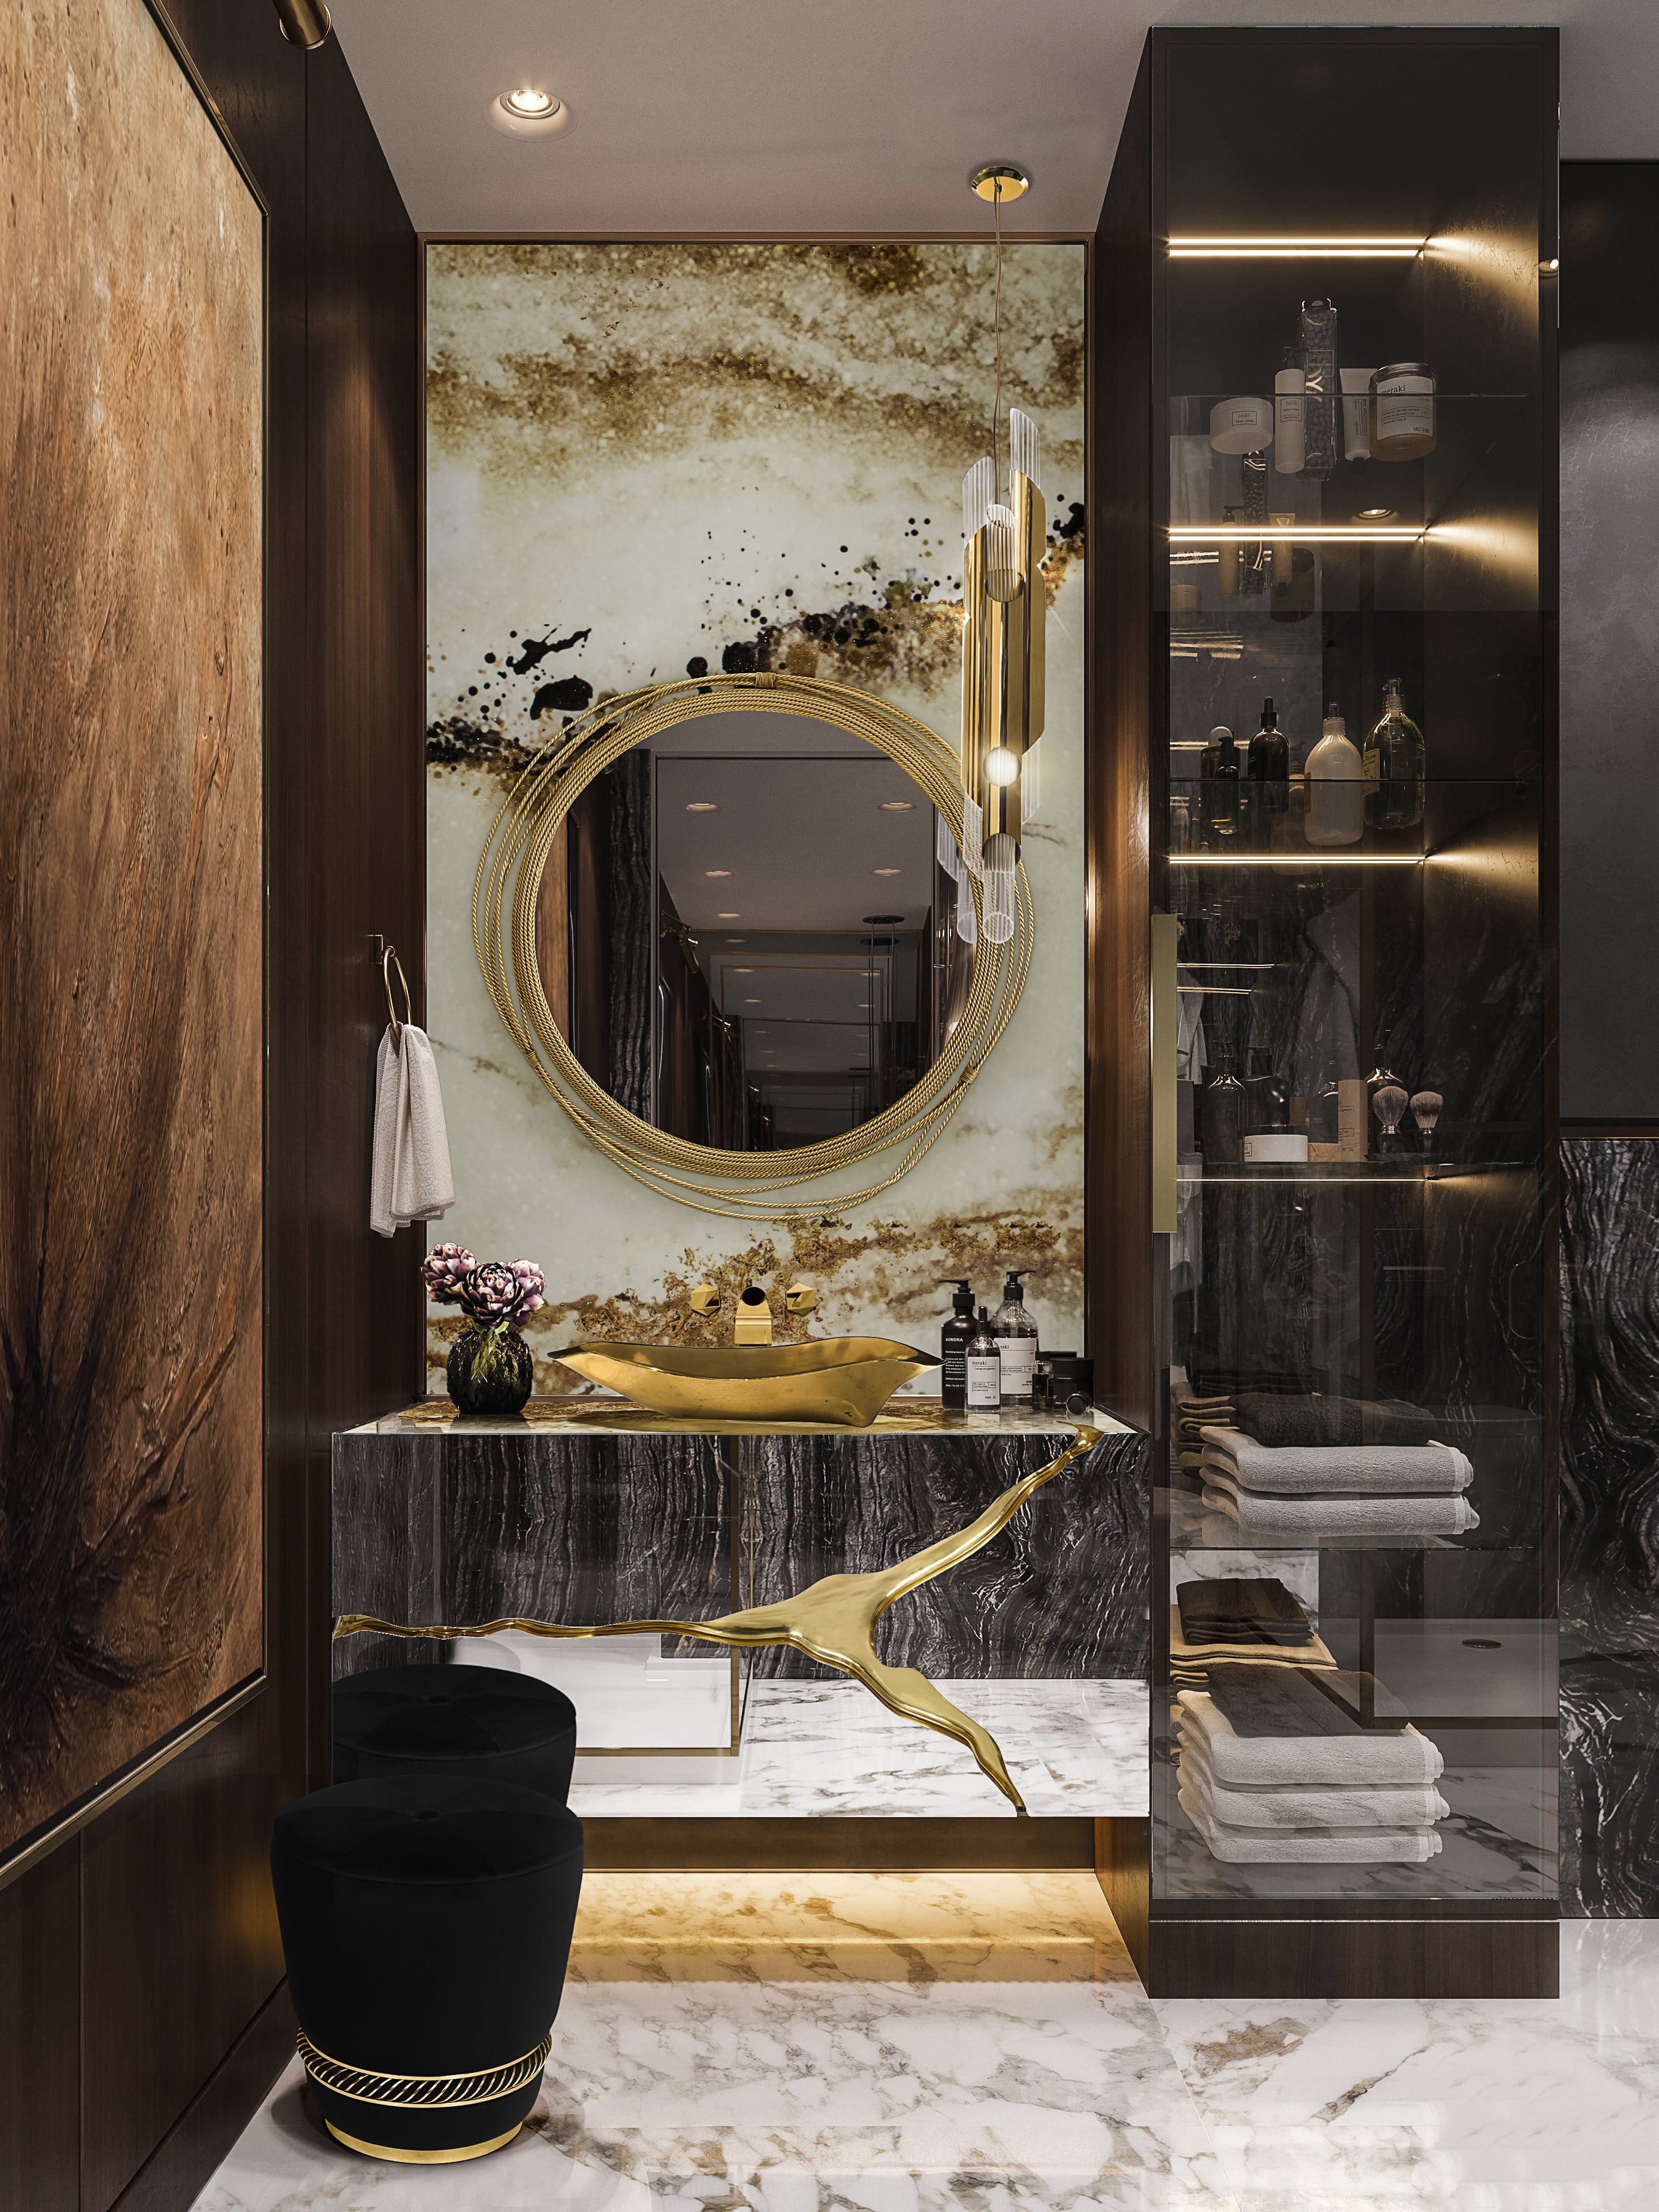 Dark and Gold Bathroom With Unique Cabinet With Brass Design - Home'Society